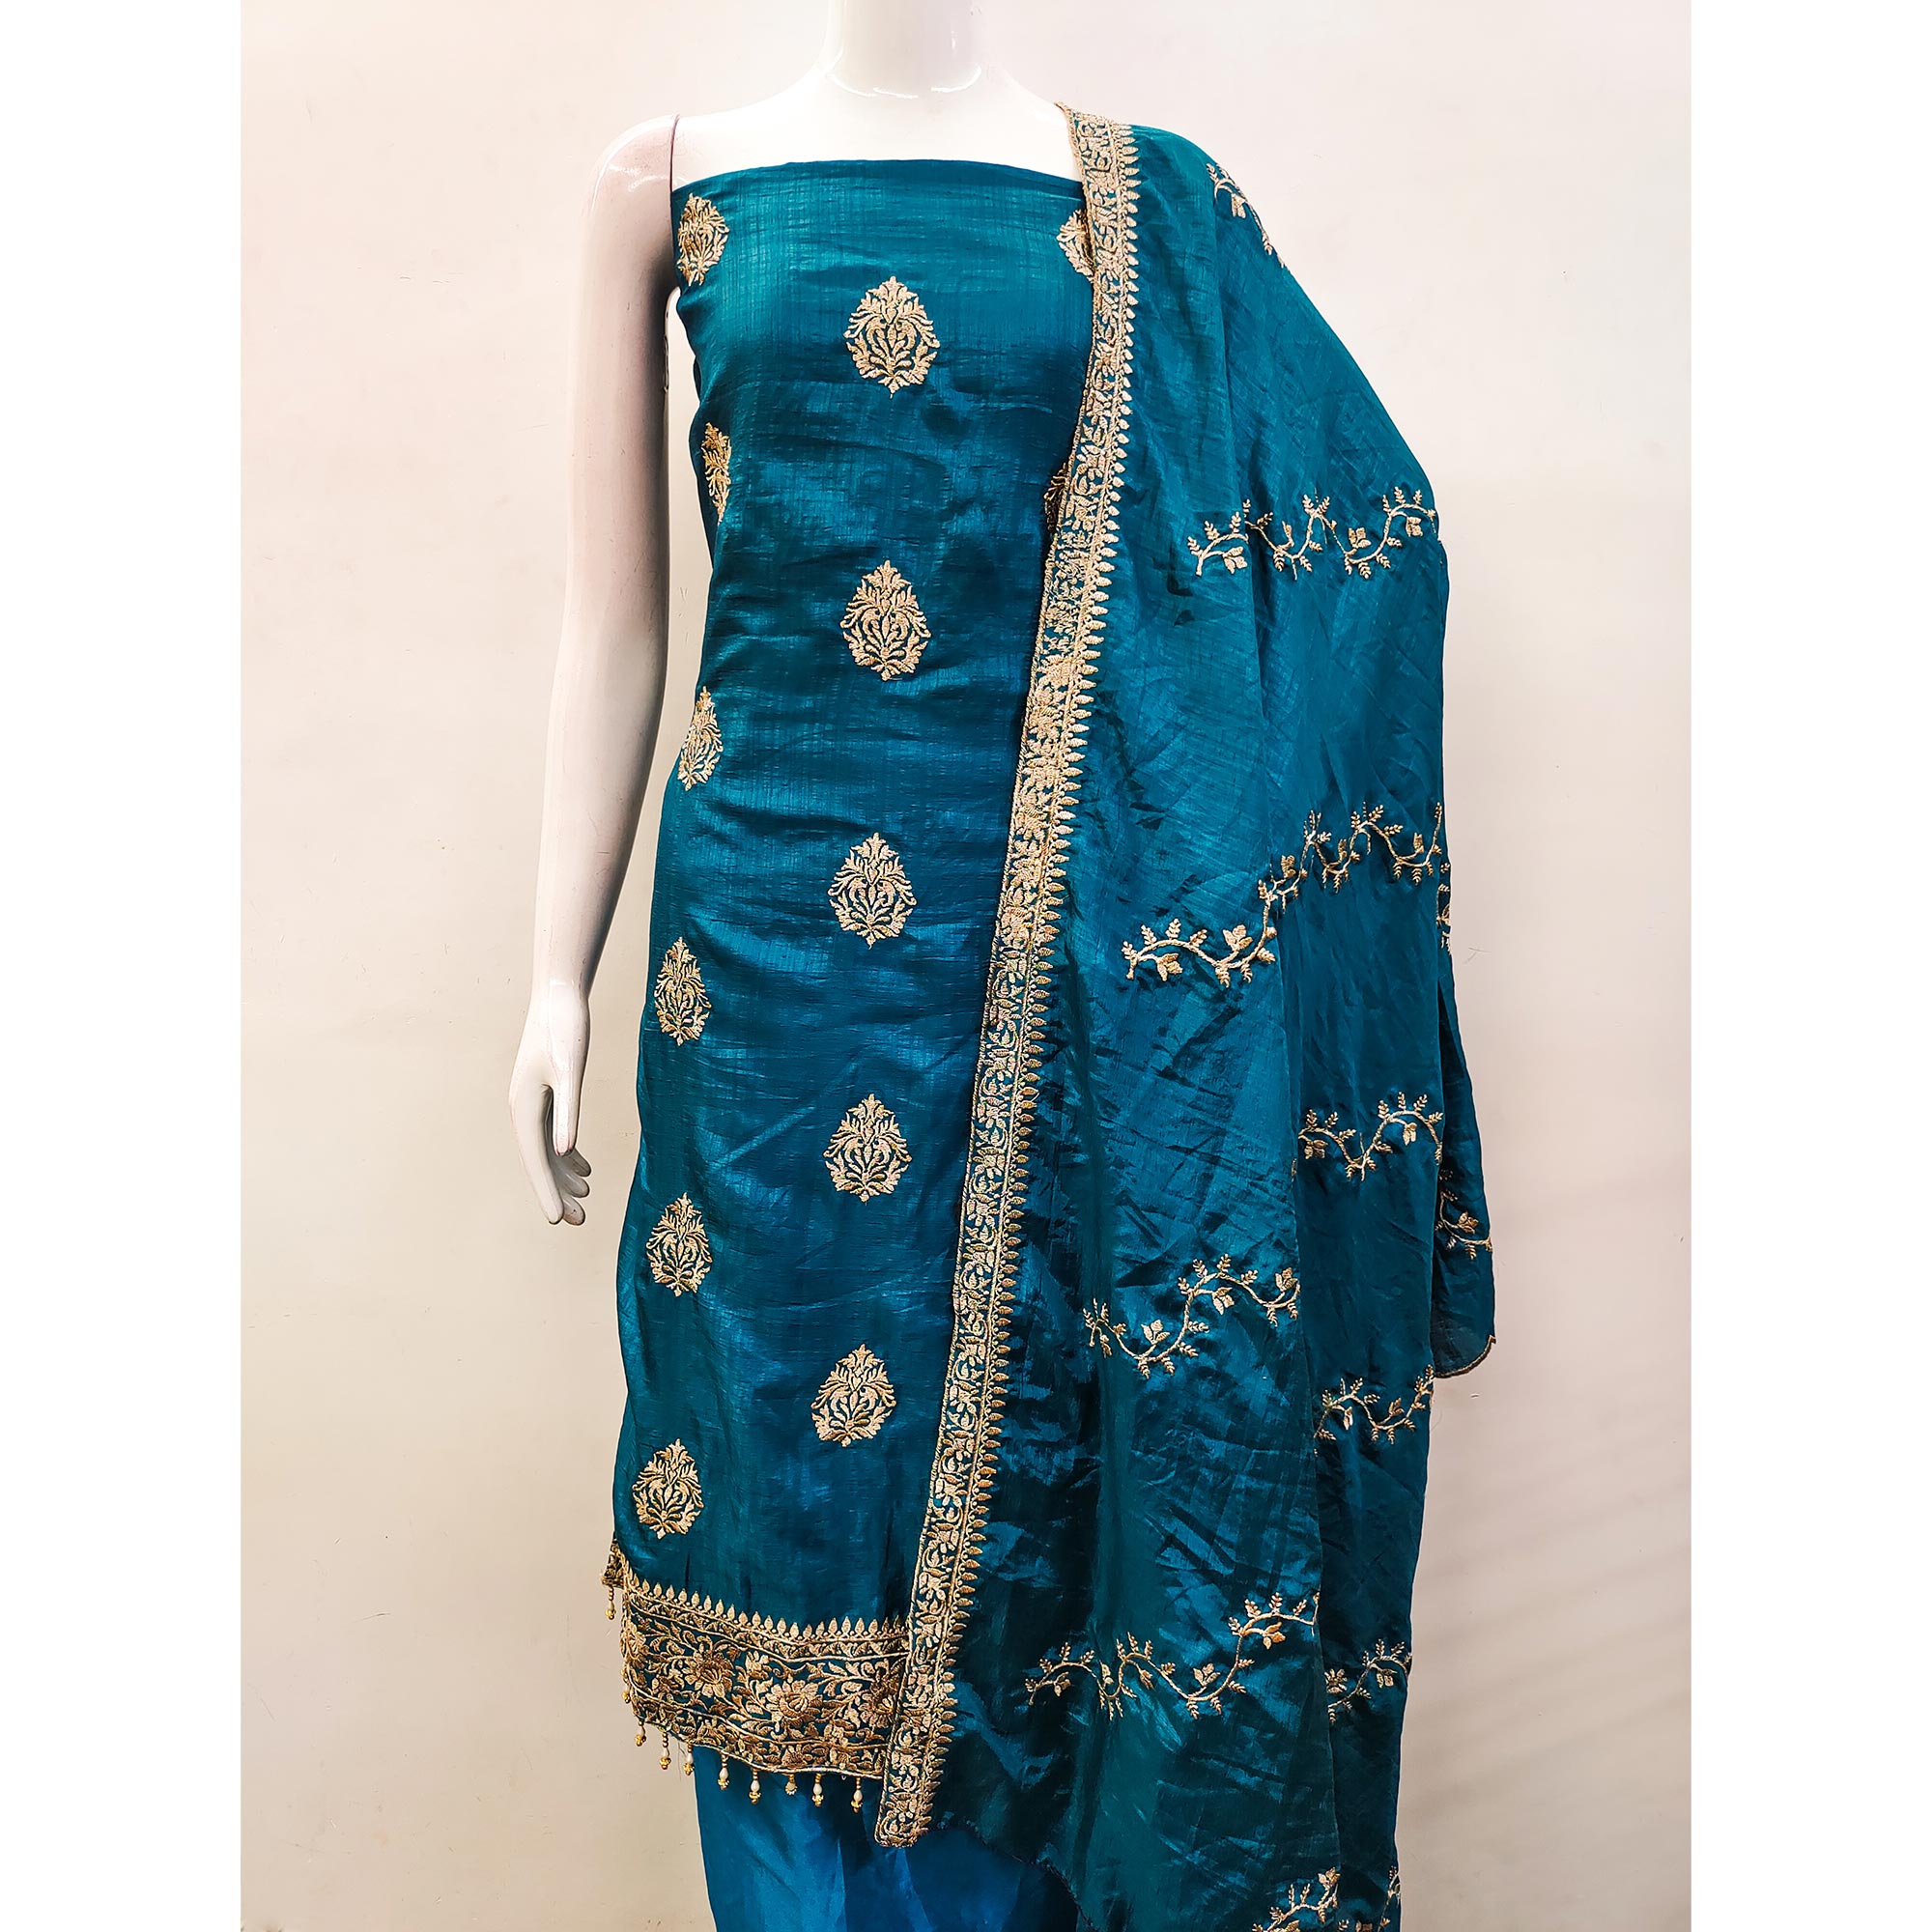 Morpich Floral Embroidered Vichitra Silk Dress Material